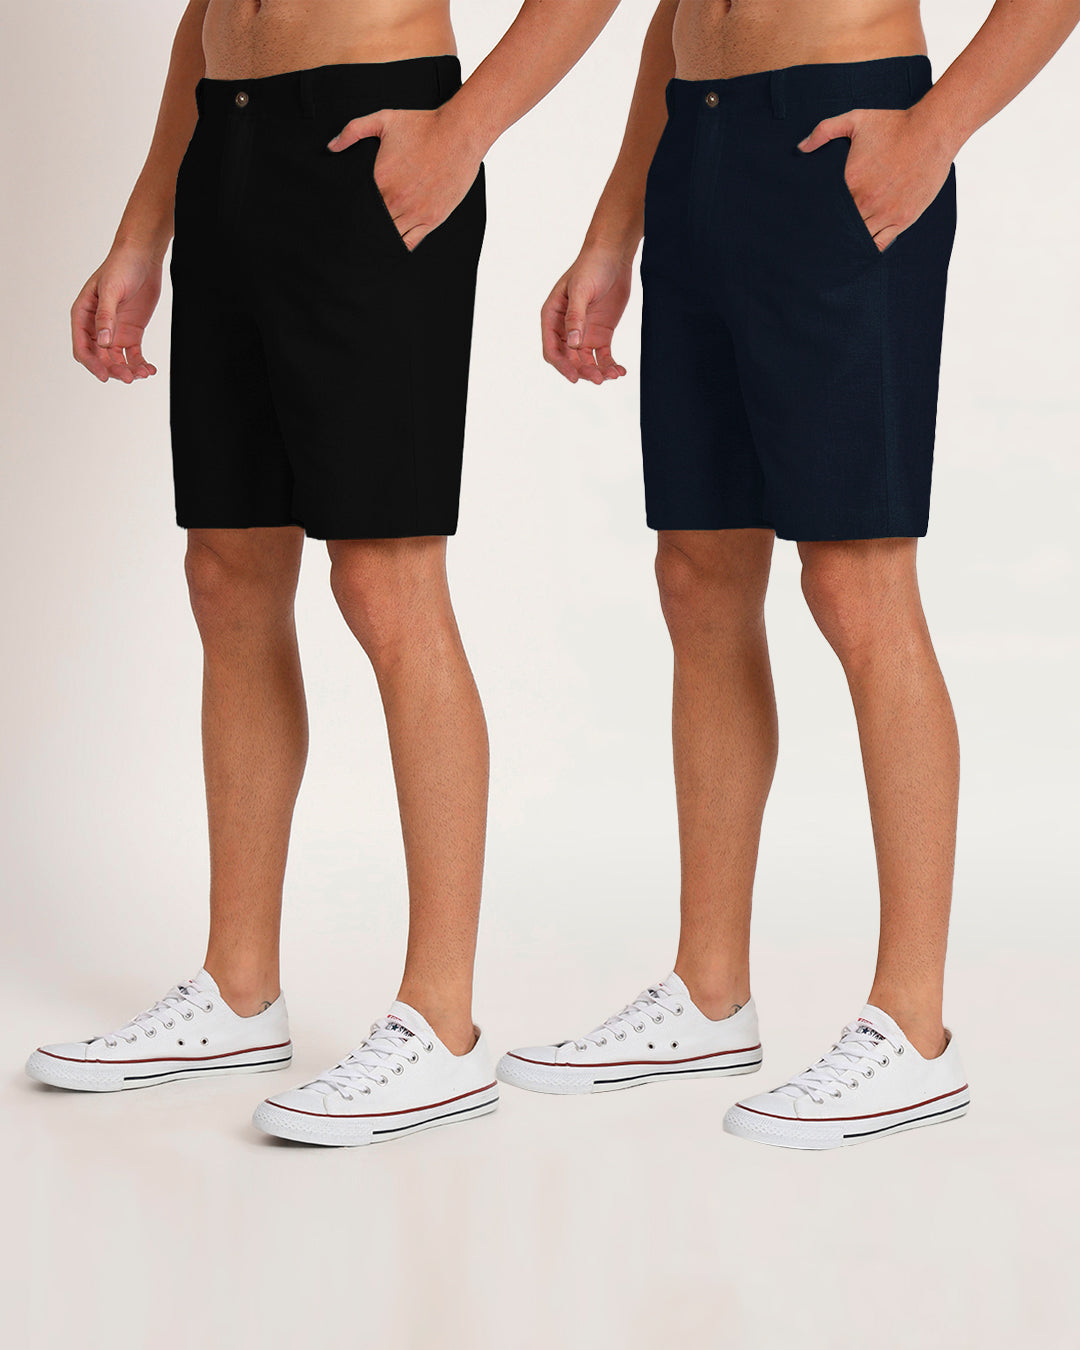 Combo : Ready For Anything Black & Midnight Blue Men's Shorts